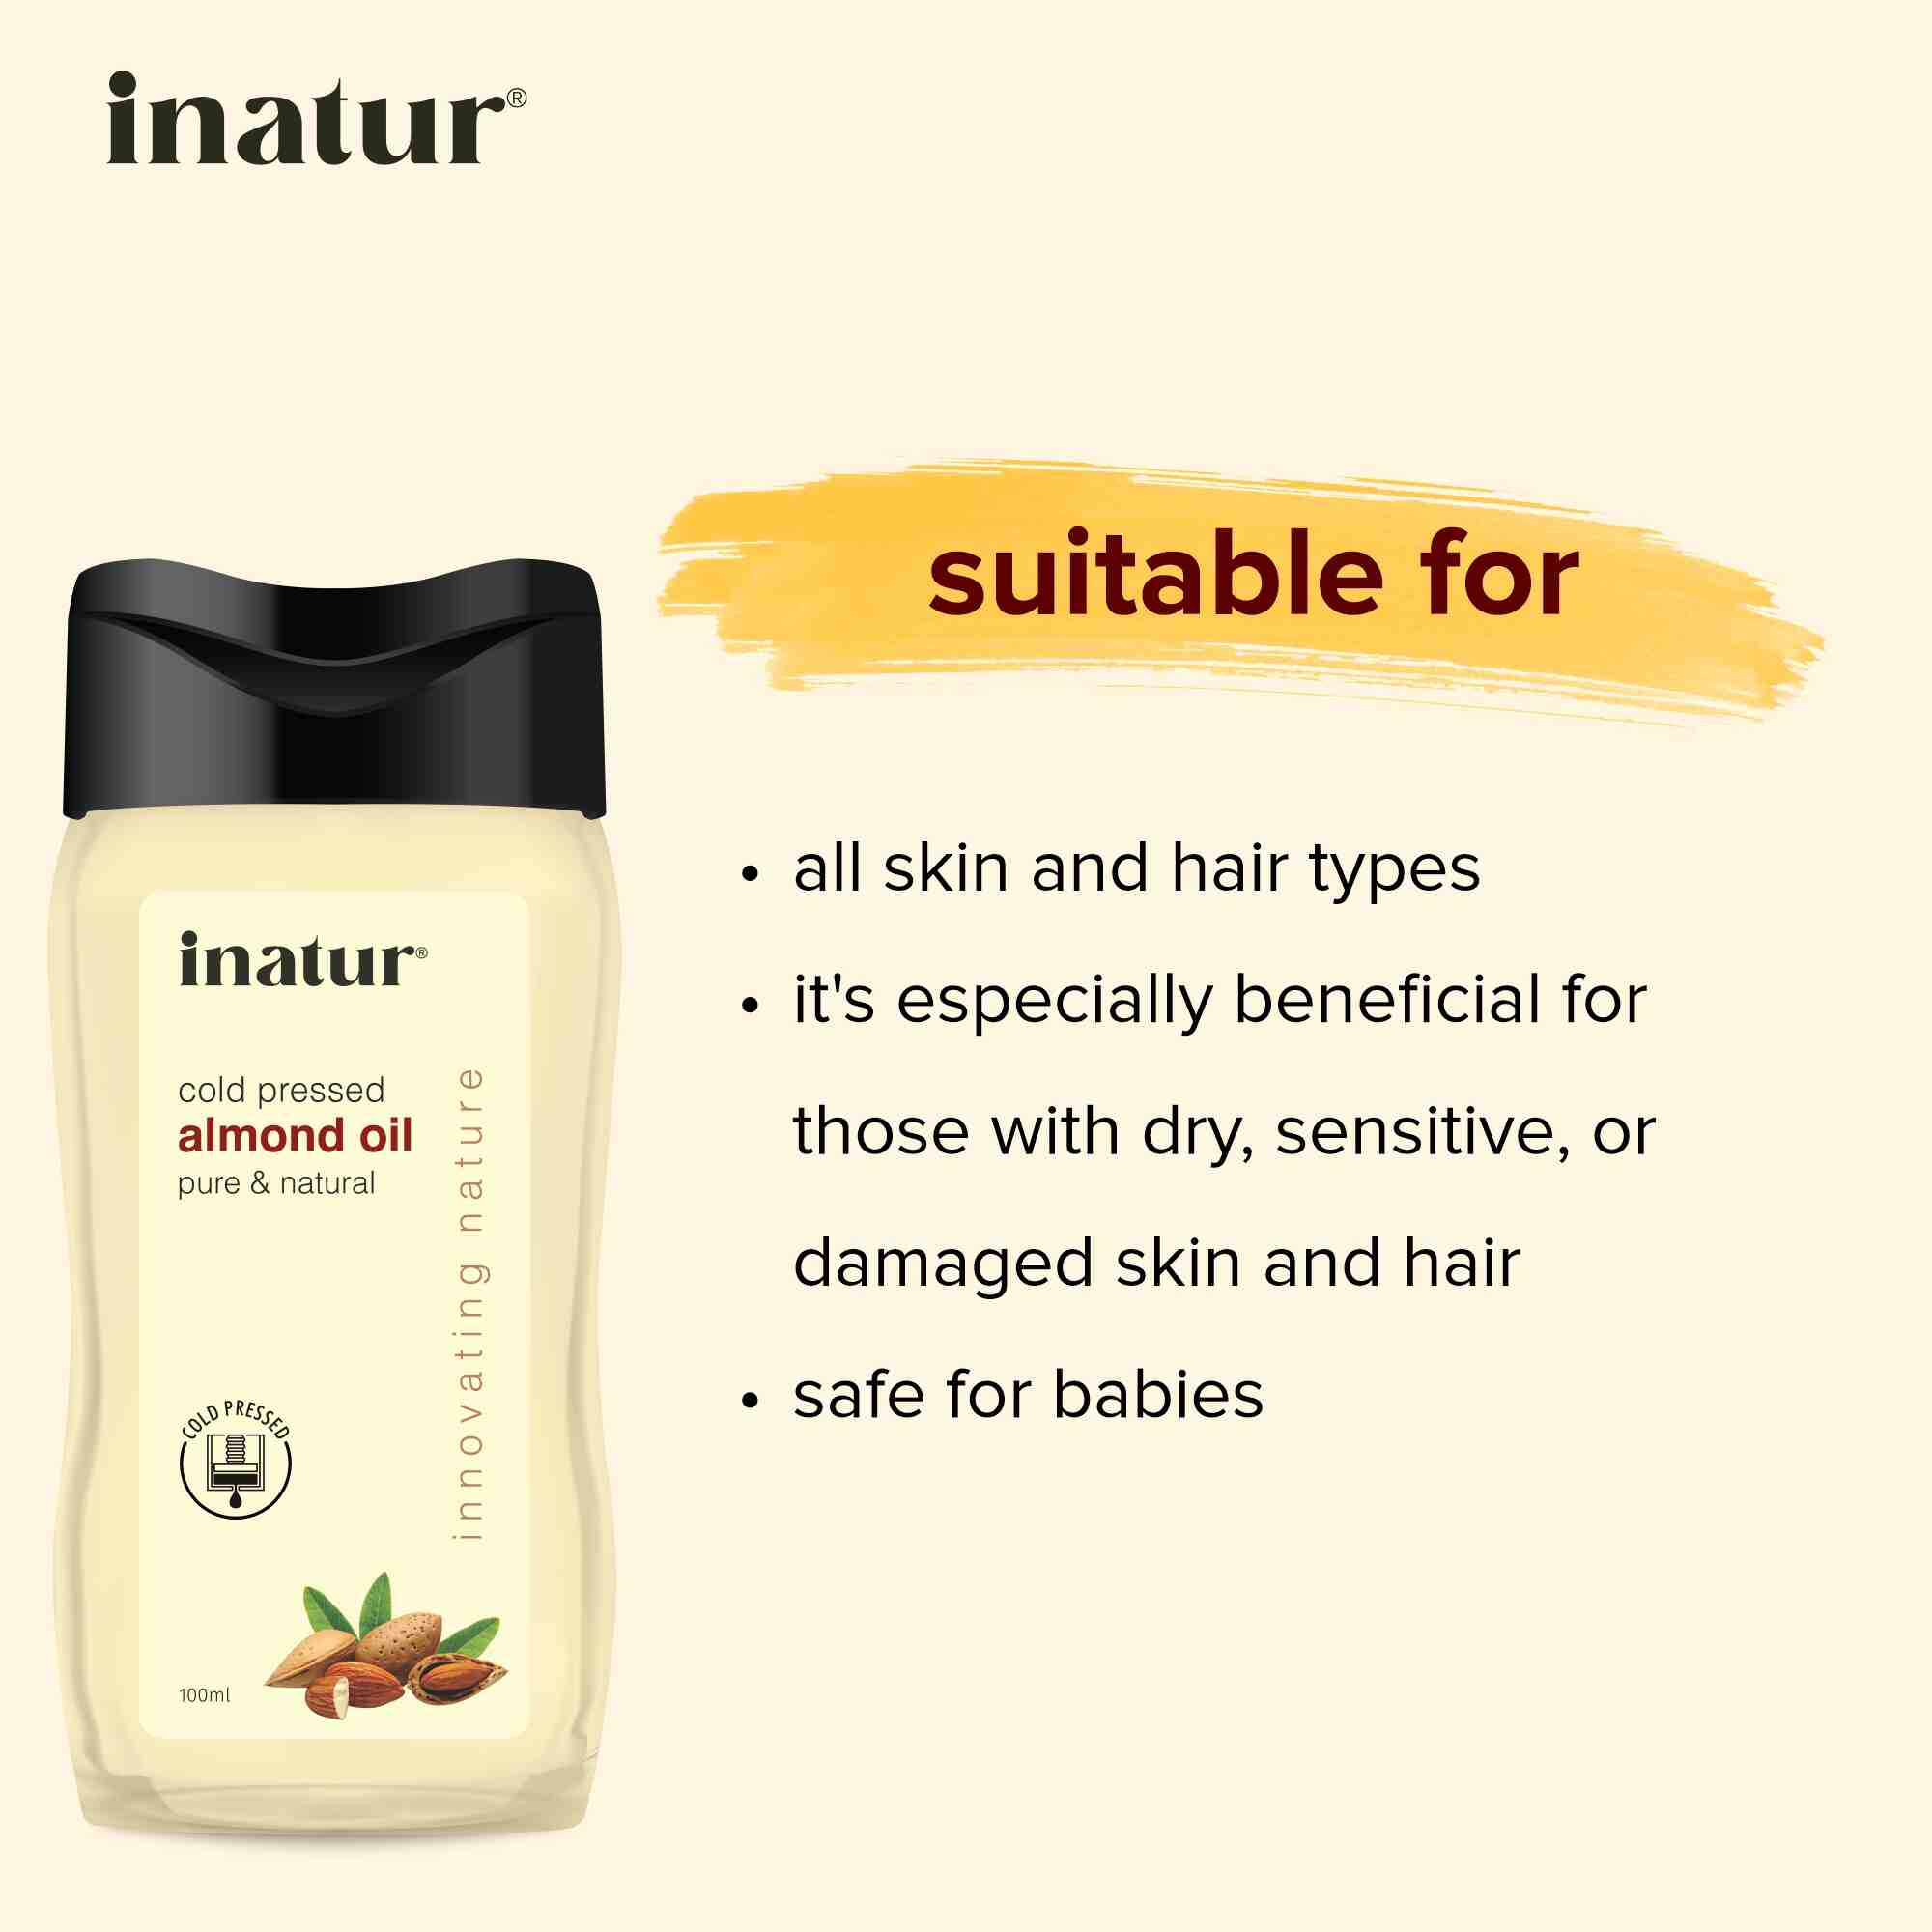 inatur cold pressed almond oil suitable for